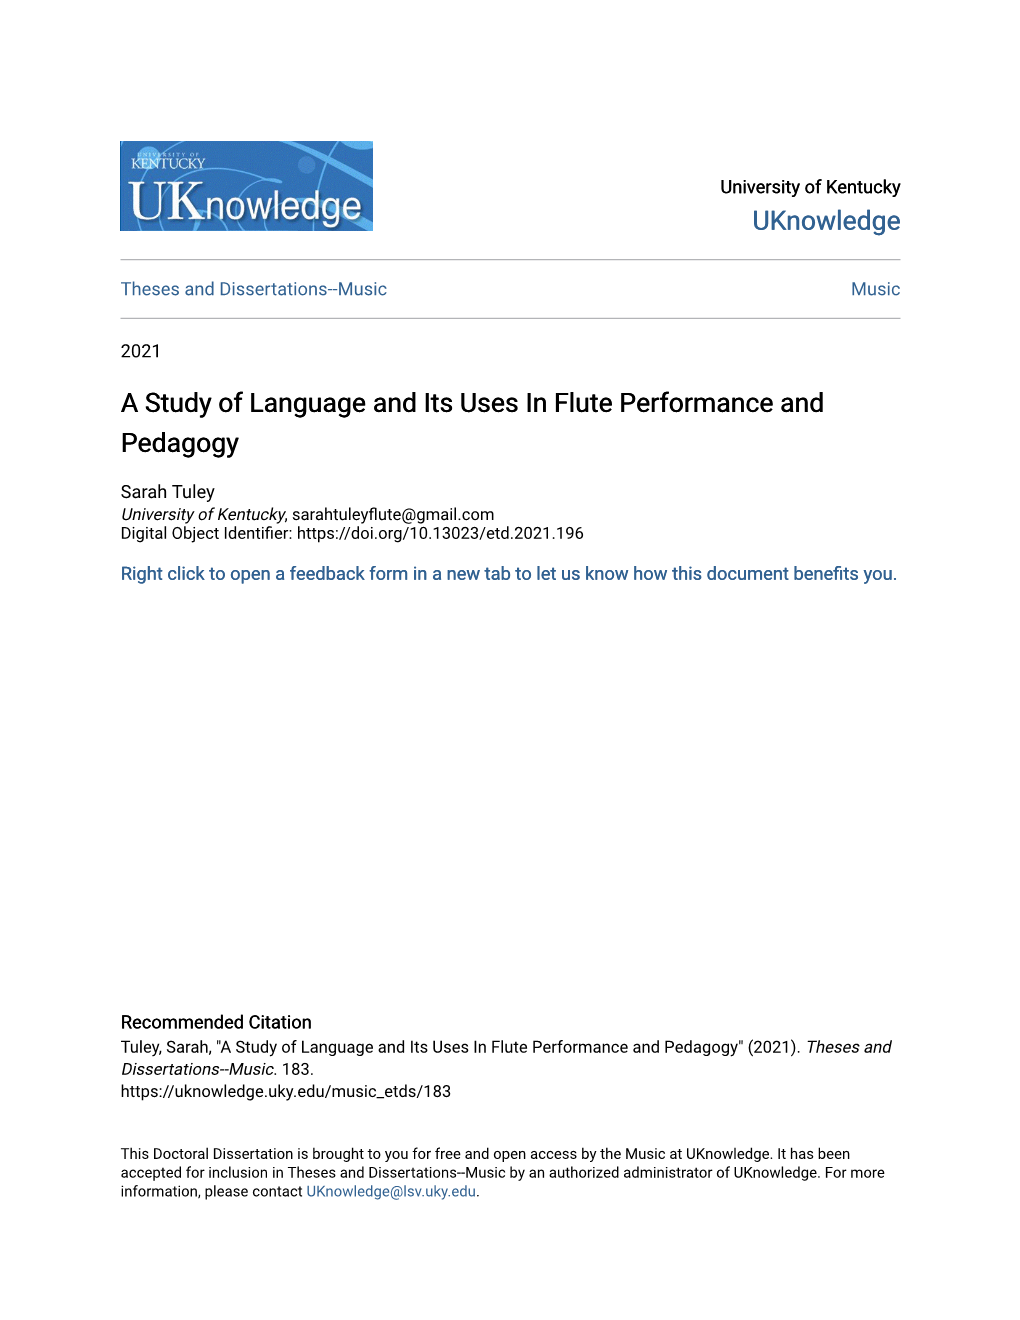 A Study of Language and Its Uses in Flute Performance and Pedagogy